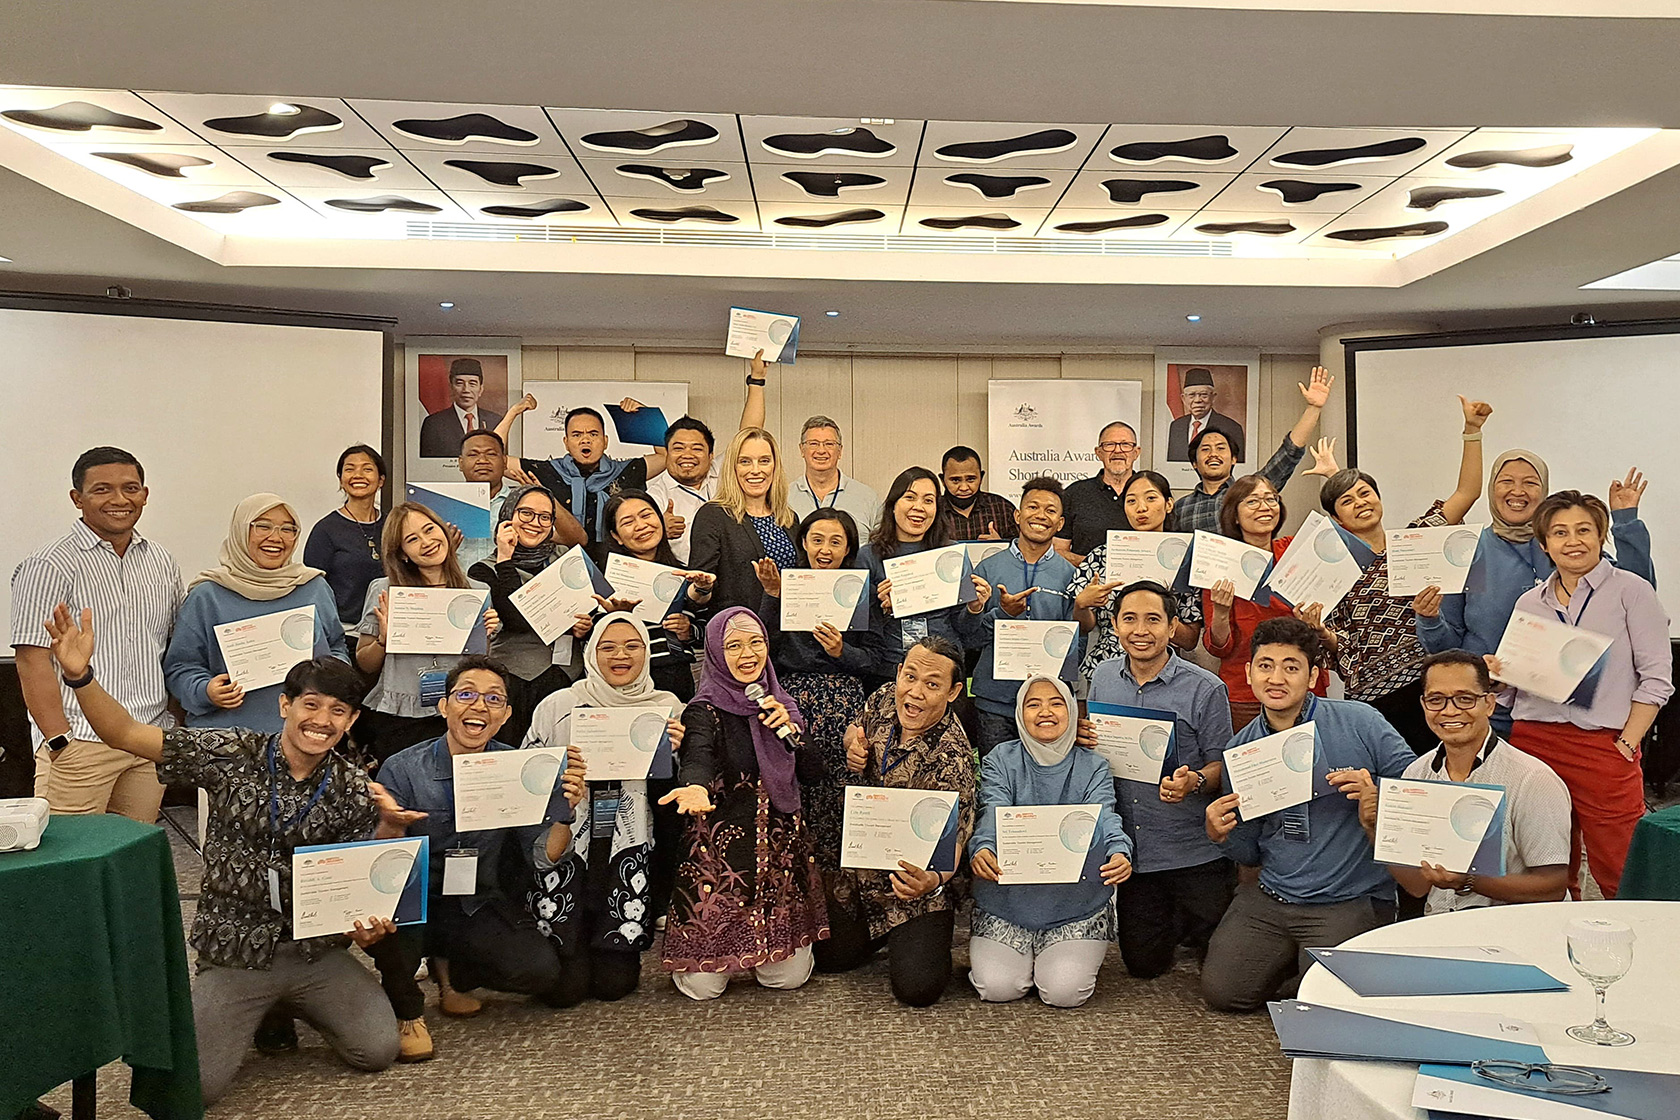 The course participants finishes the post-course workshop and exhibit the hard-earned course certificate, marking their status as the Australia Awards alumni.